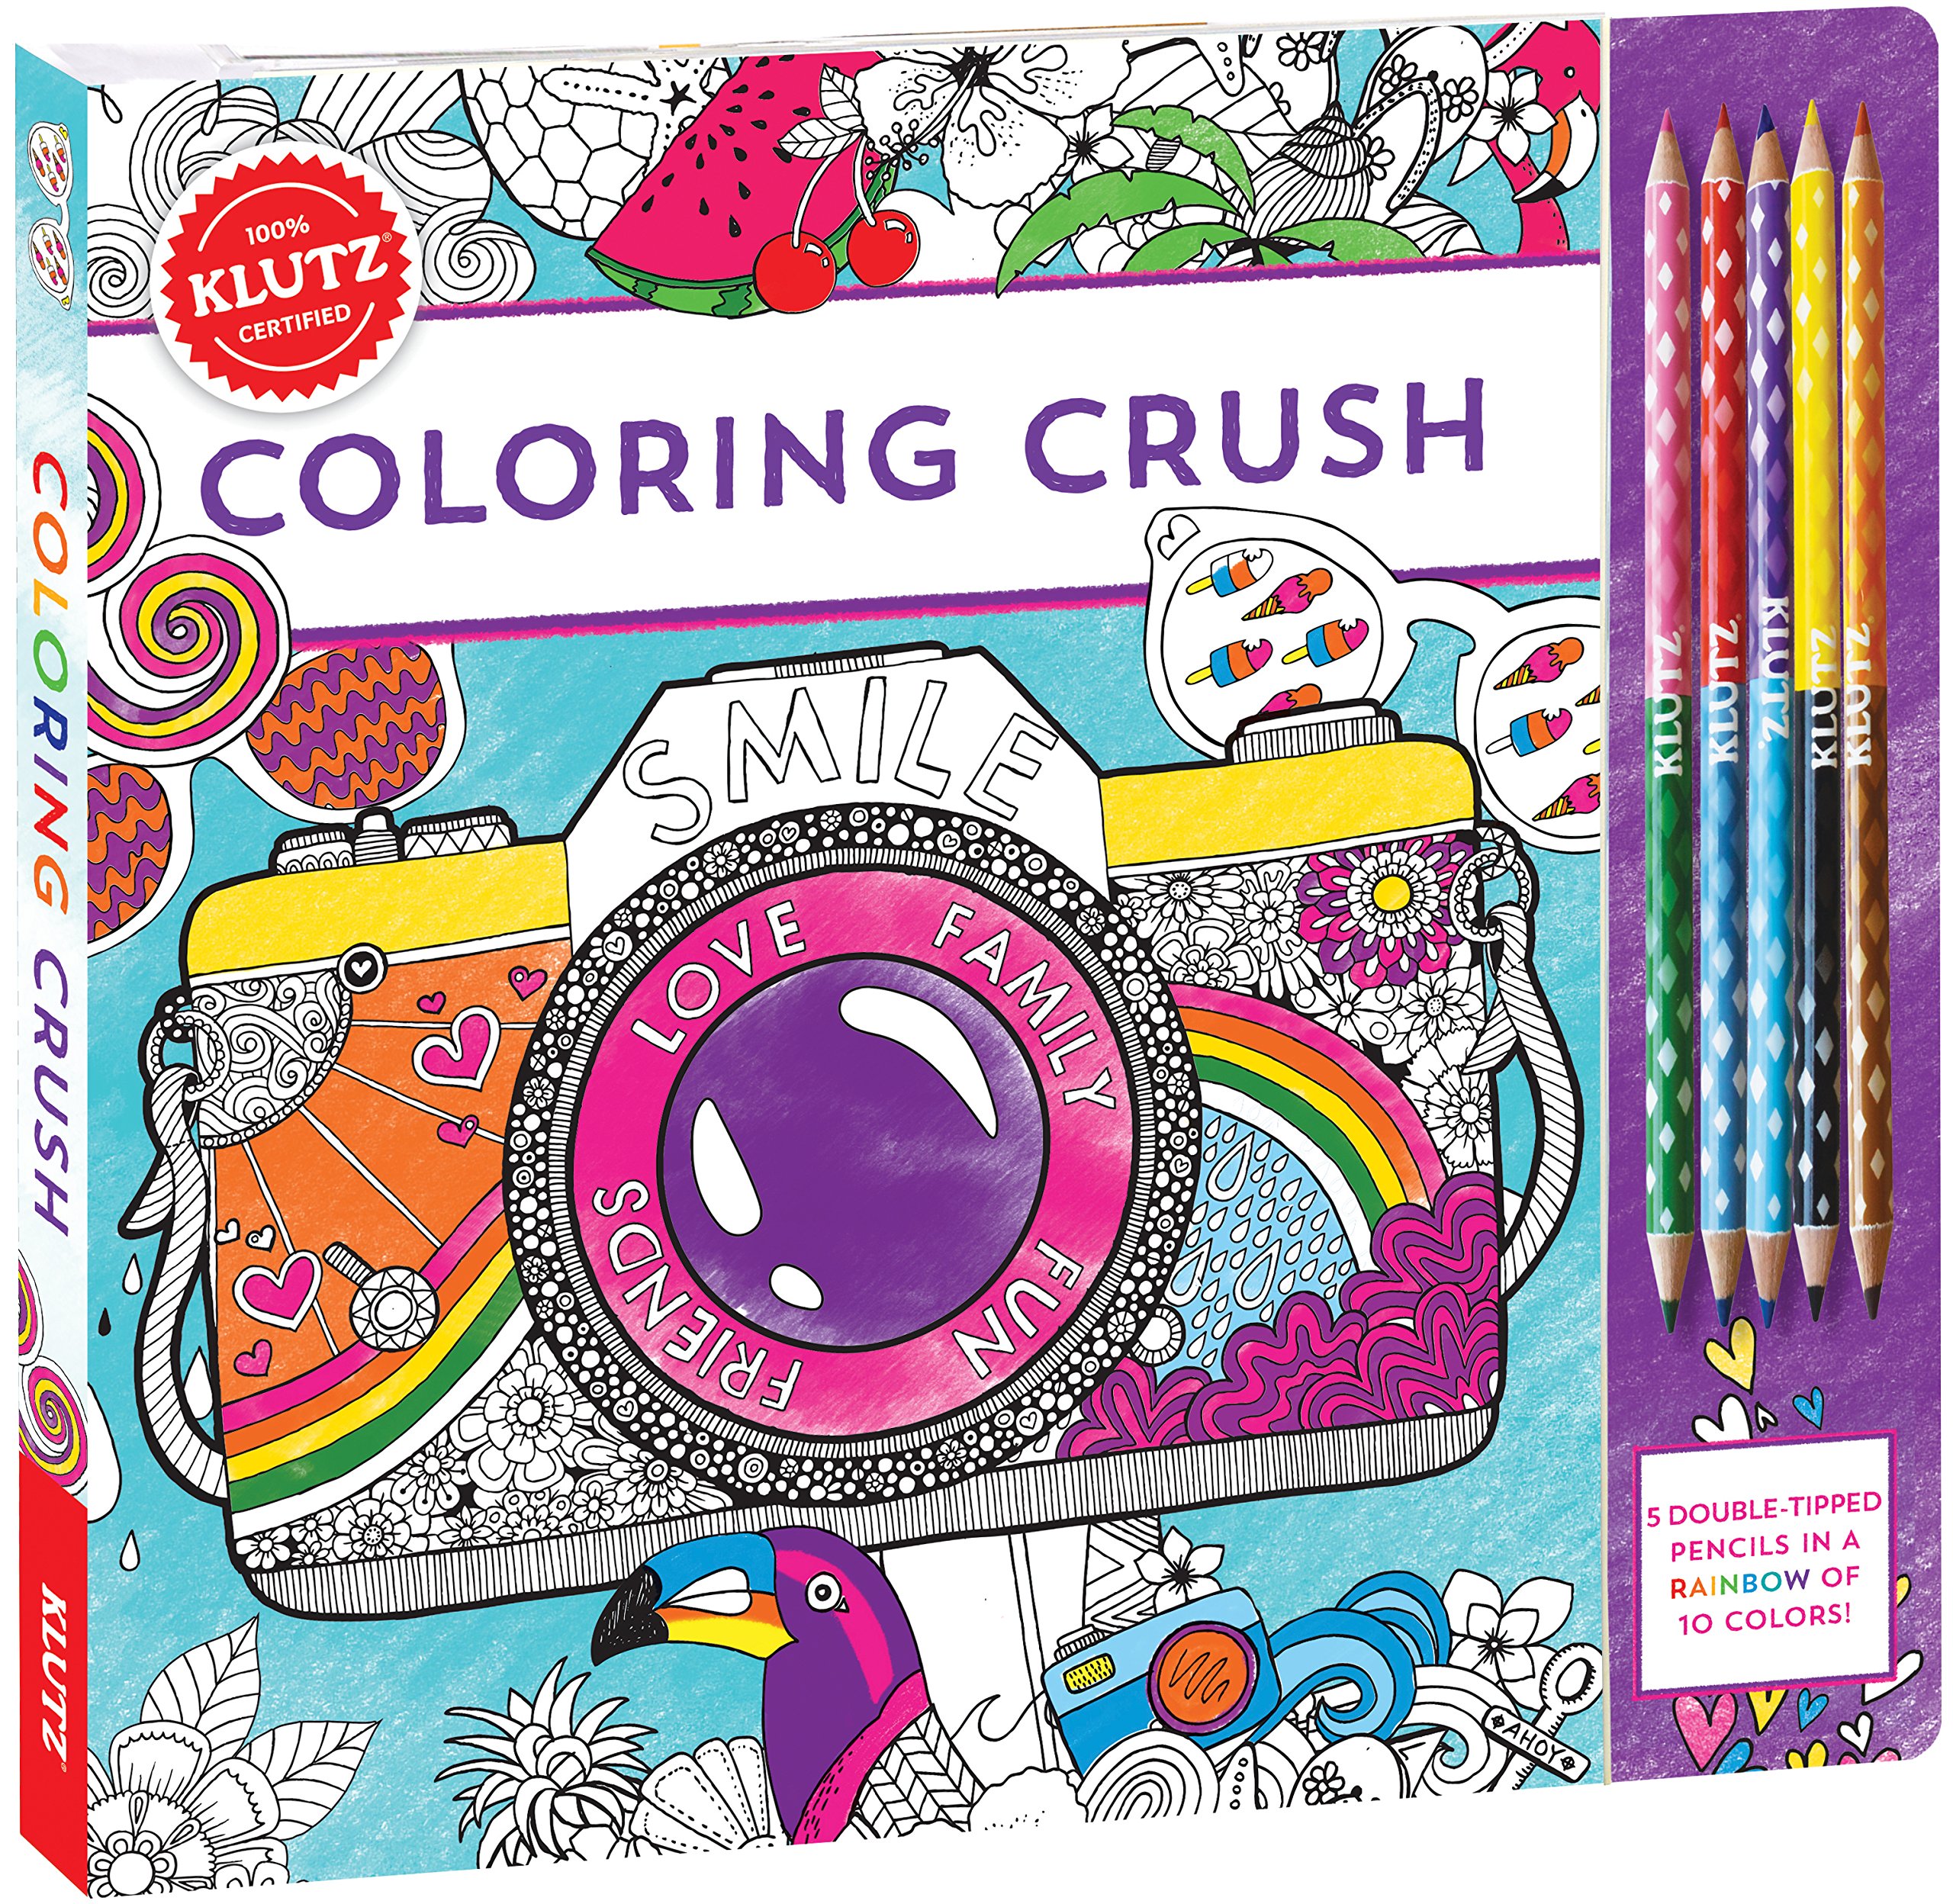 Coloring Crush: Book Includes 5 Double-tipped Colored Pencils (Klutz)